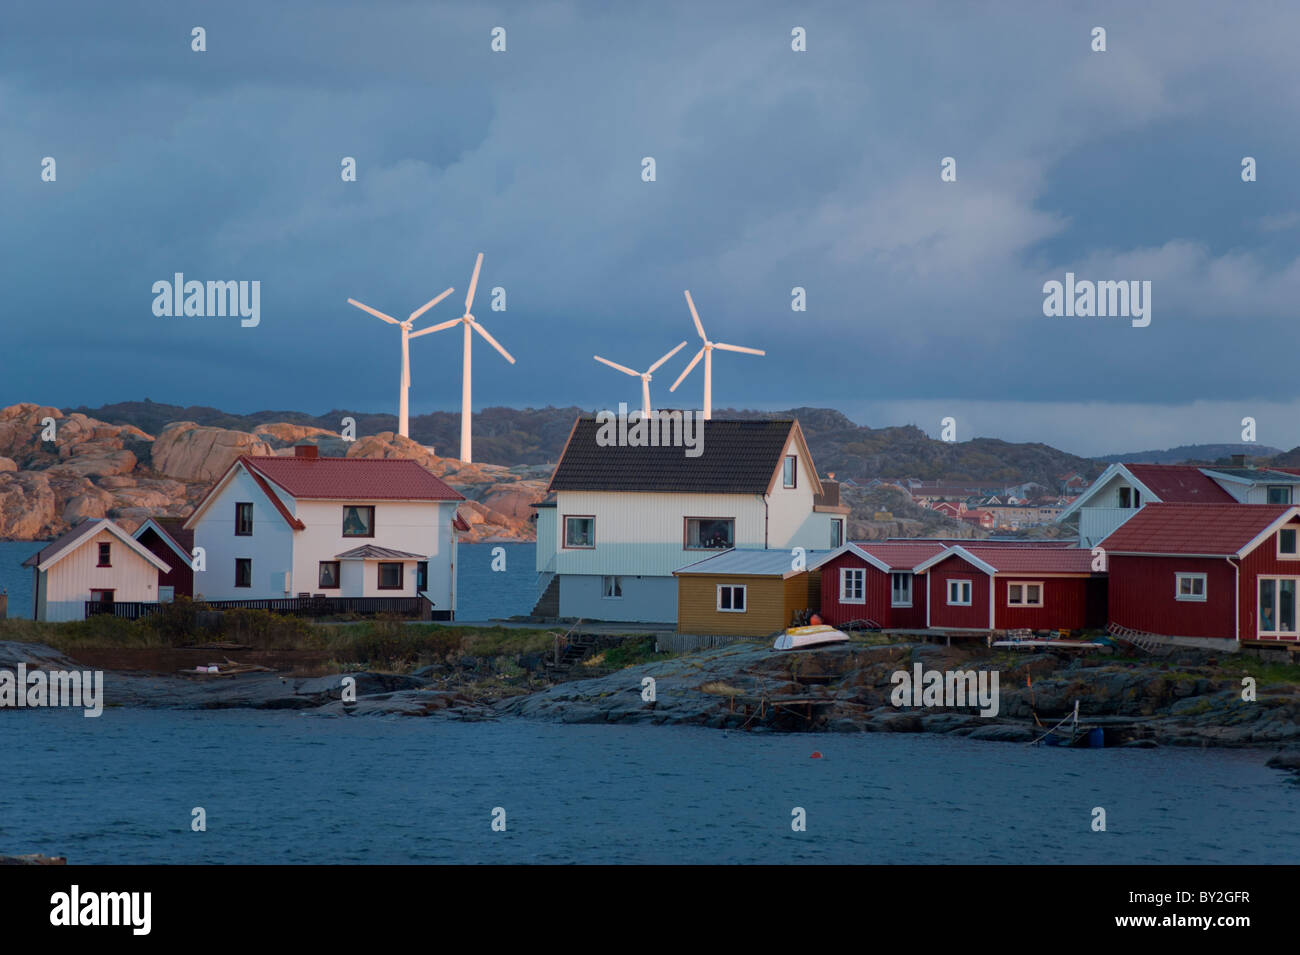 Buildings on the island of Kladesholmen, (Also known as Herring Island) Sweden. with wind driven turbines in the background. Stock Photo